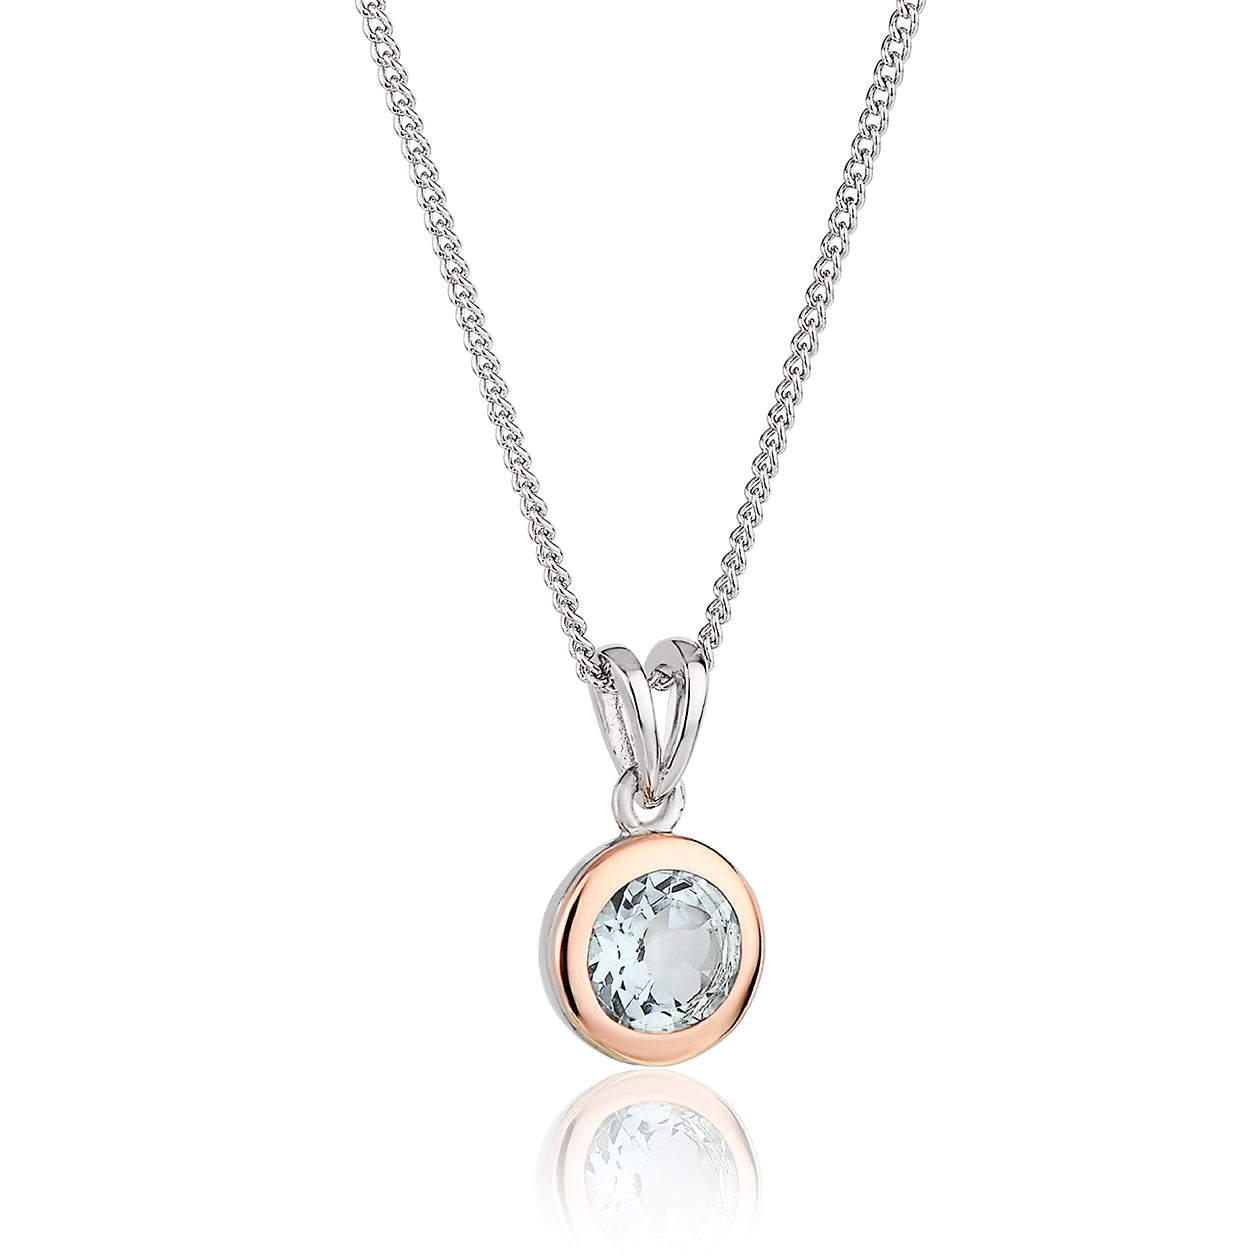 March Birthstone Silver and Aquamarine Pendant – Clogau Outlet